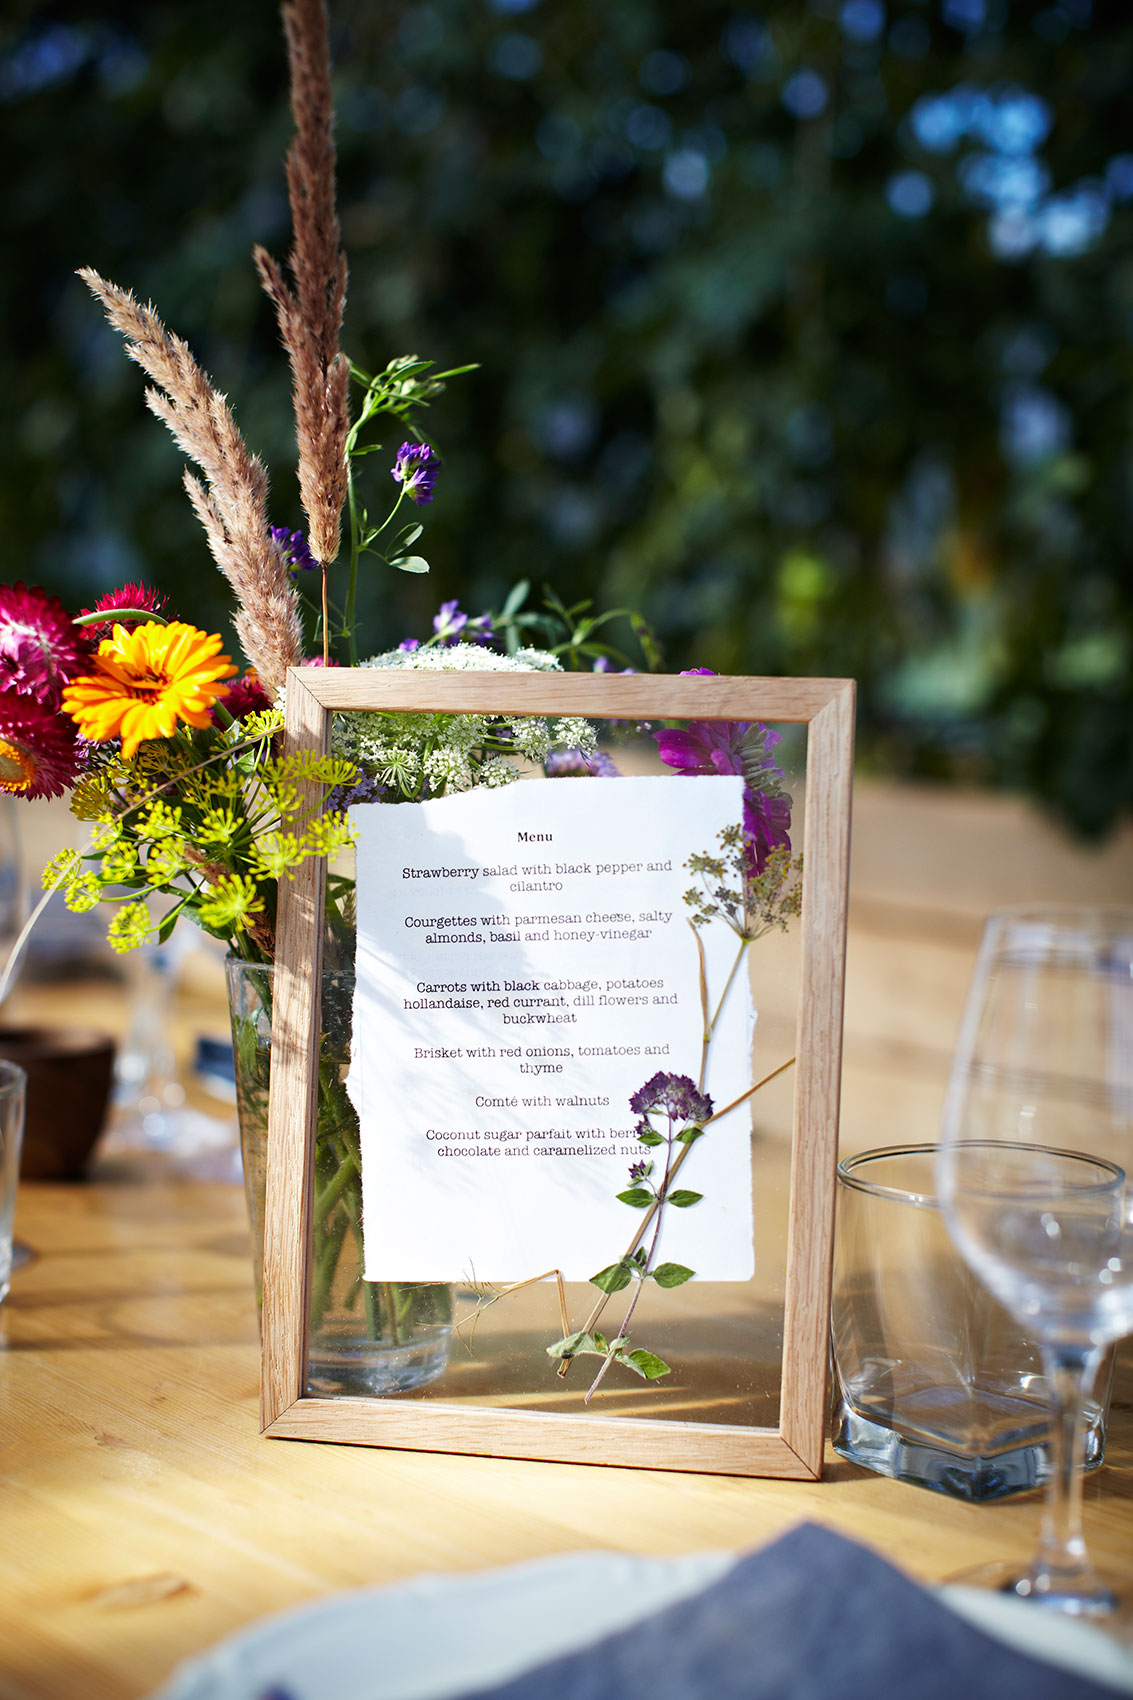 Stedsans in the Woods • Outdoor Lunch Menu in Glass Frame with Wild Flowers • Lifestyle & Editorial Food Photography